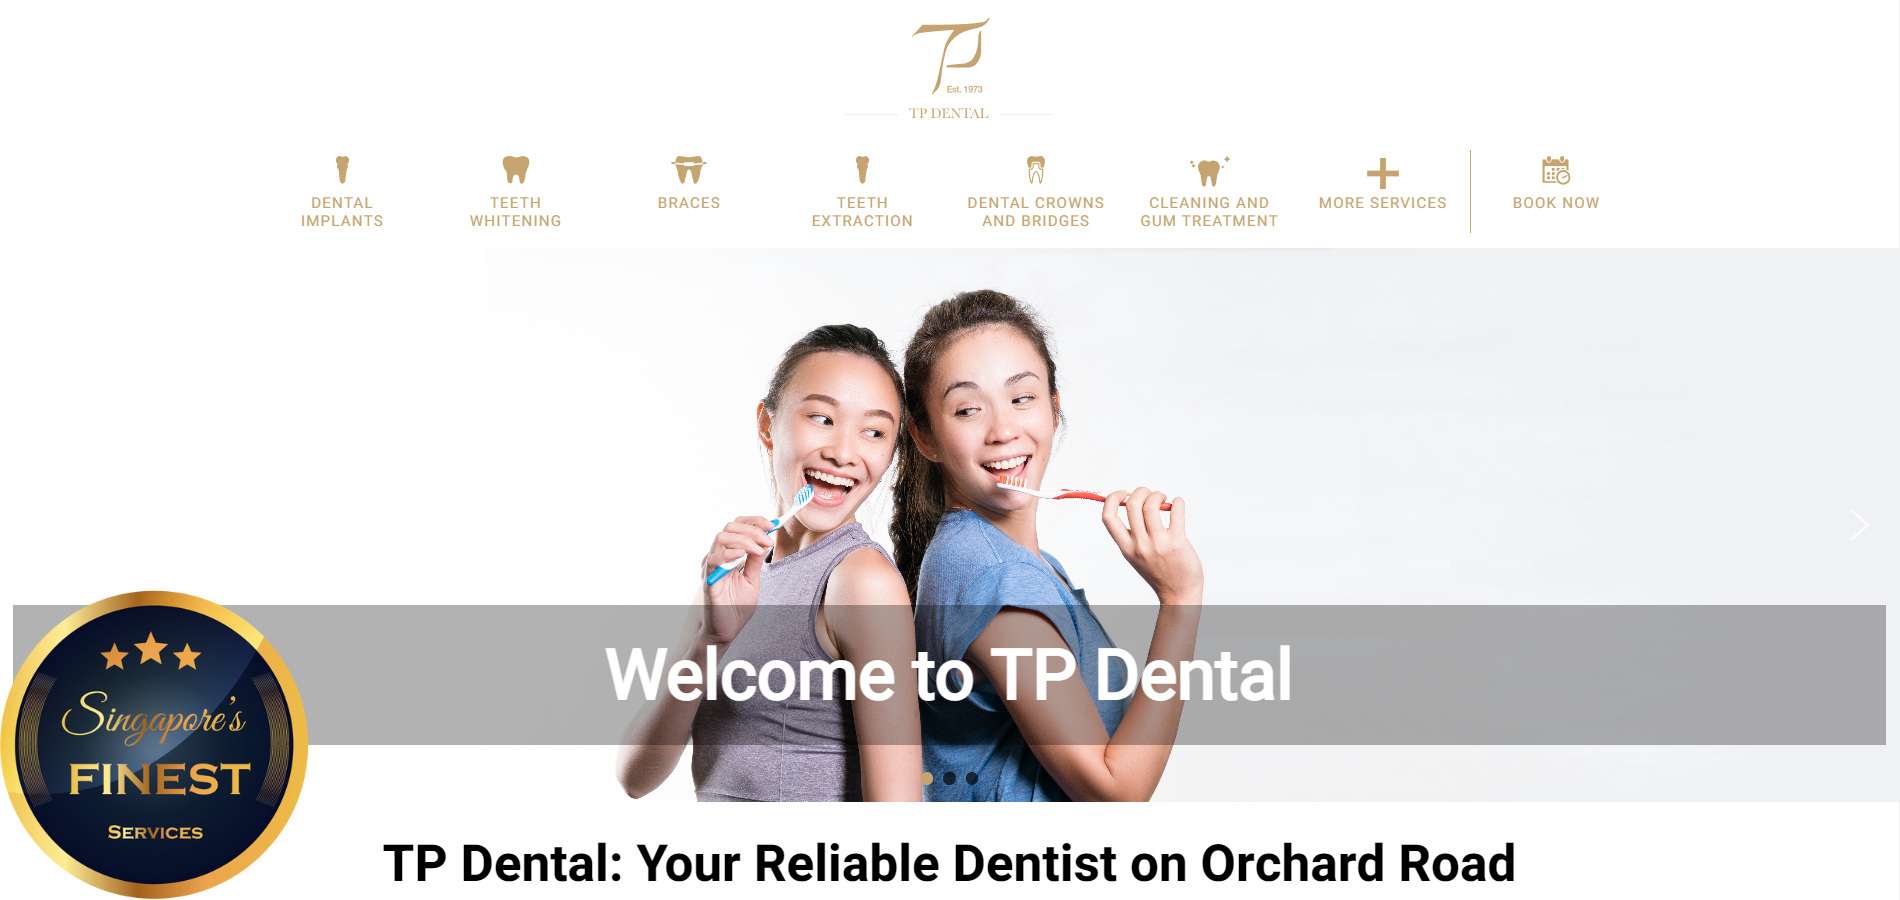 The Finest Clinics for Ceramic Braces in Singapore